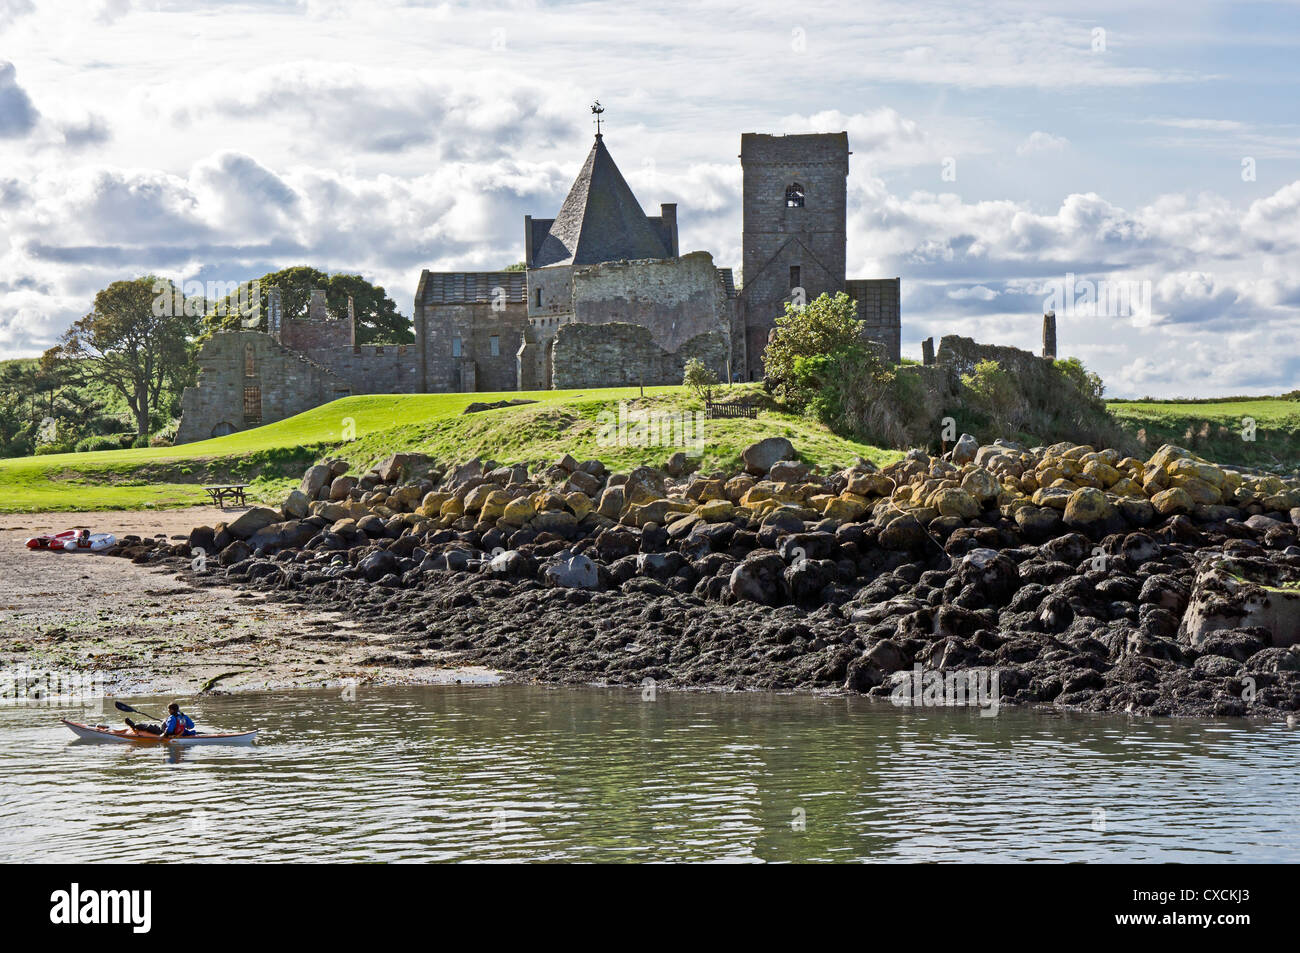 St Colm's Abbey on the small island Inchcolm in the Firth of Forth opposite Edinburgh in Scotland as seen from the pier. Stock Photo